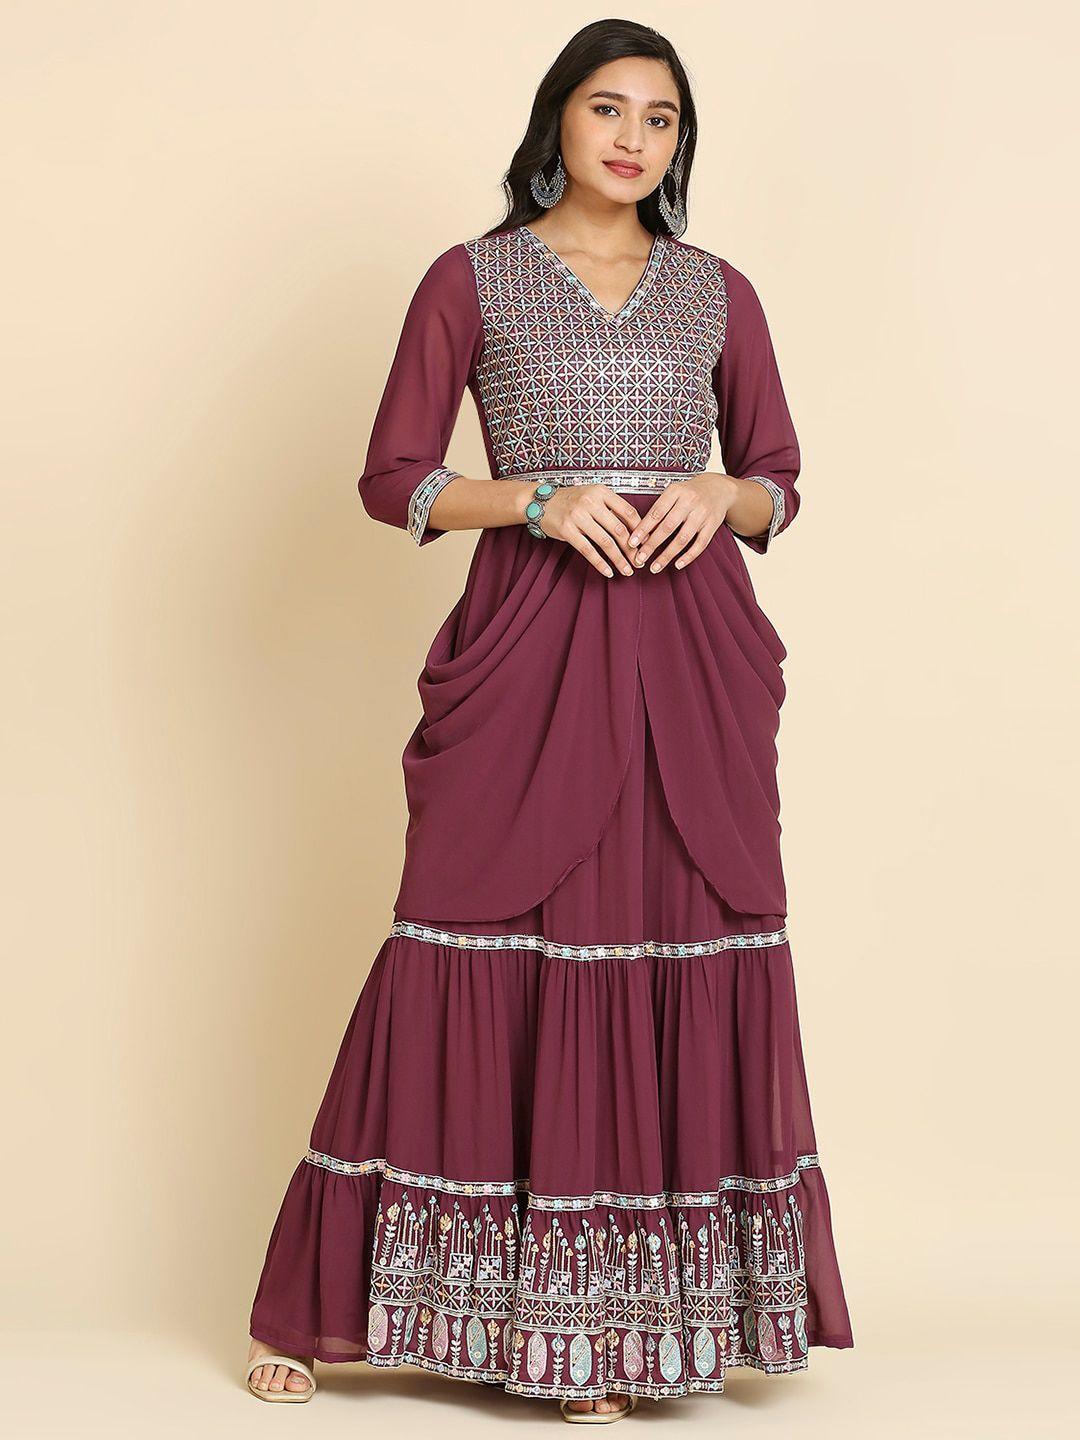 MADHURAM Embroidered Fit & Flare Maxi ethnic Dress With Belt